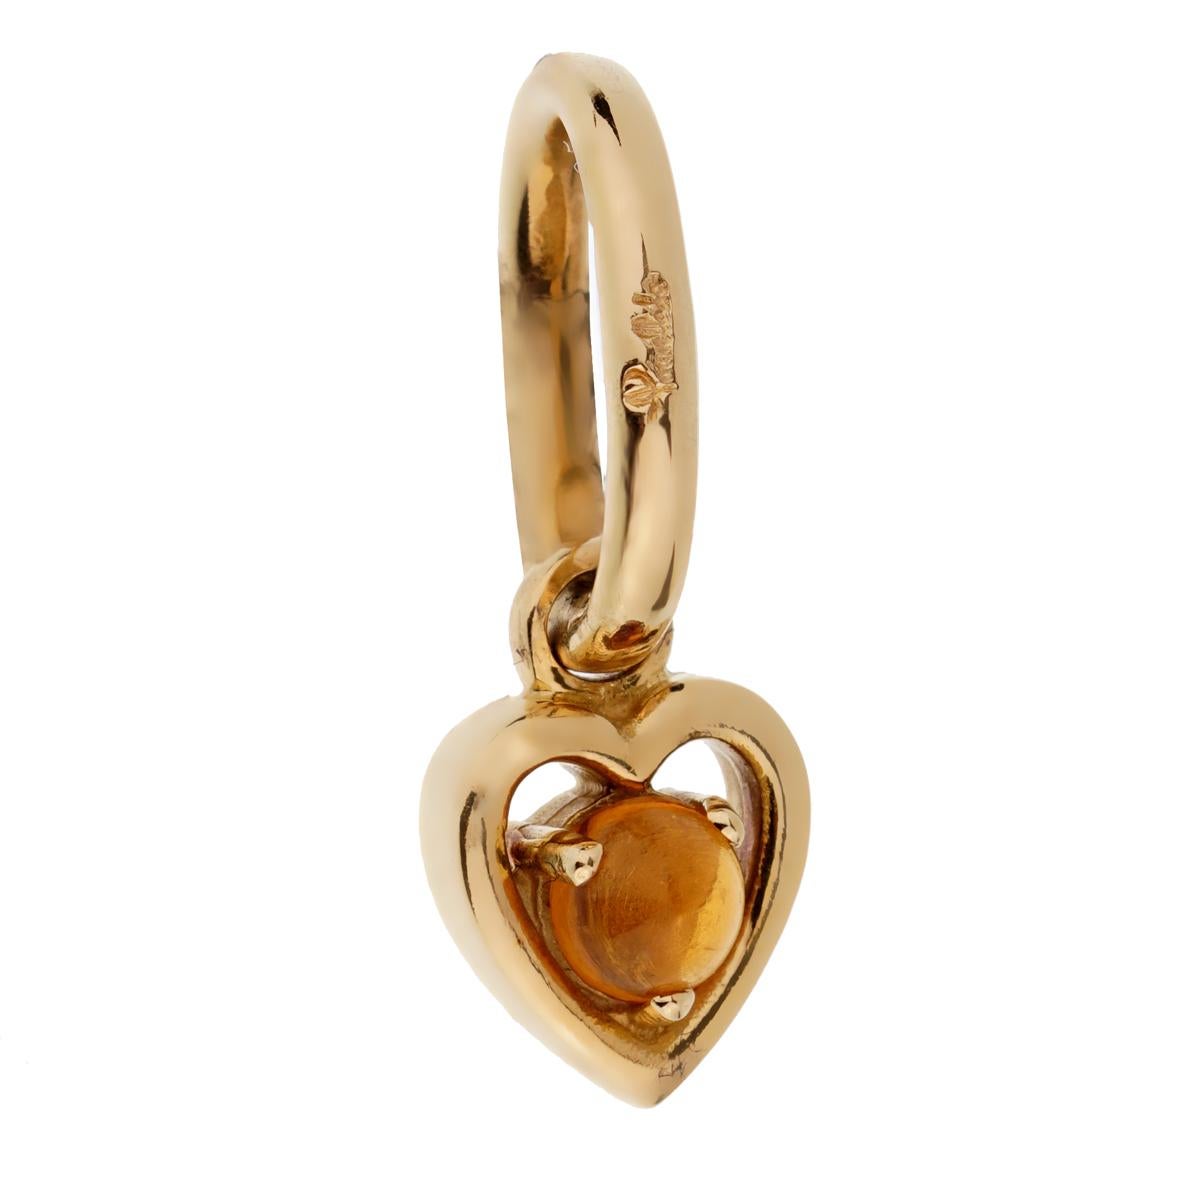 A chic brand new Pomellato charm pendant featuring a .30ct citrine set in 18k yellow gold. 

Sku: 2220